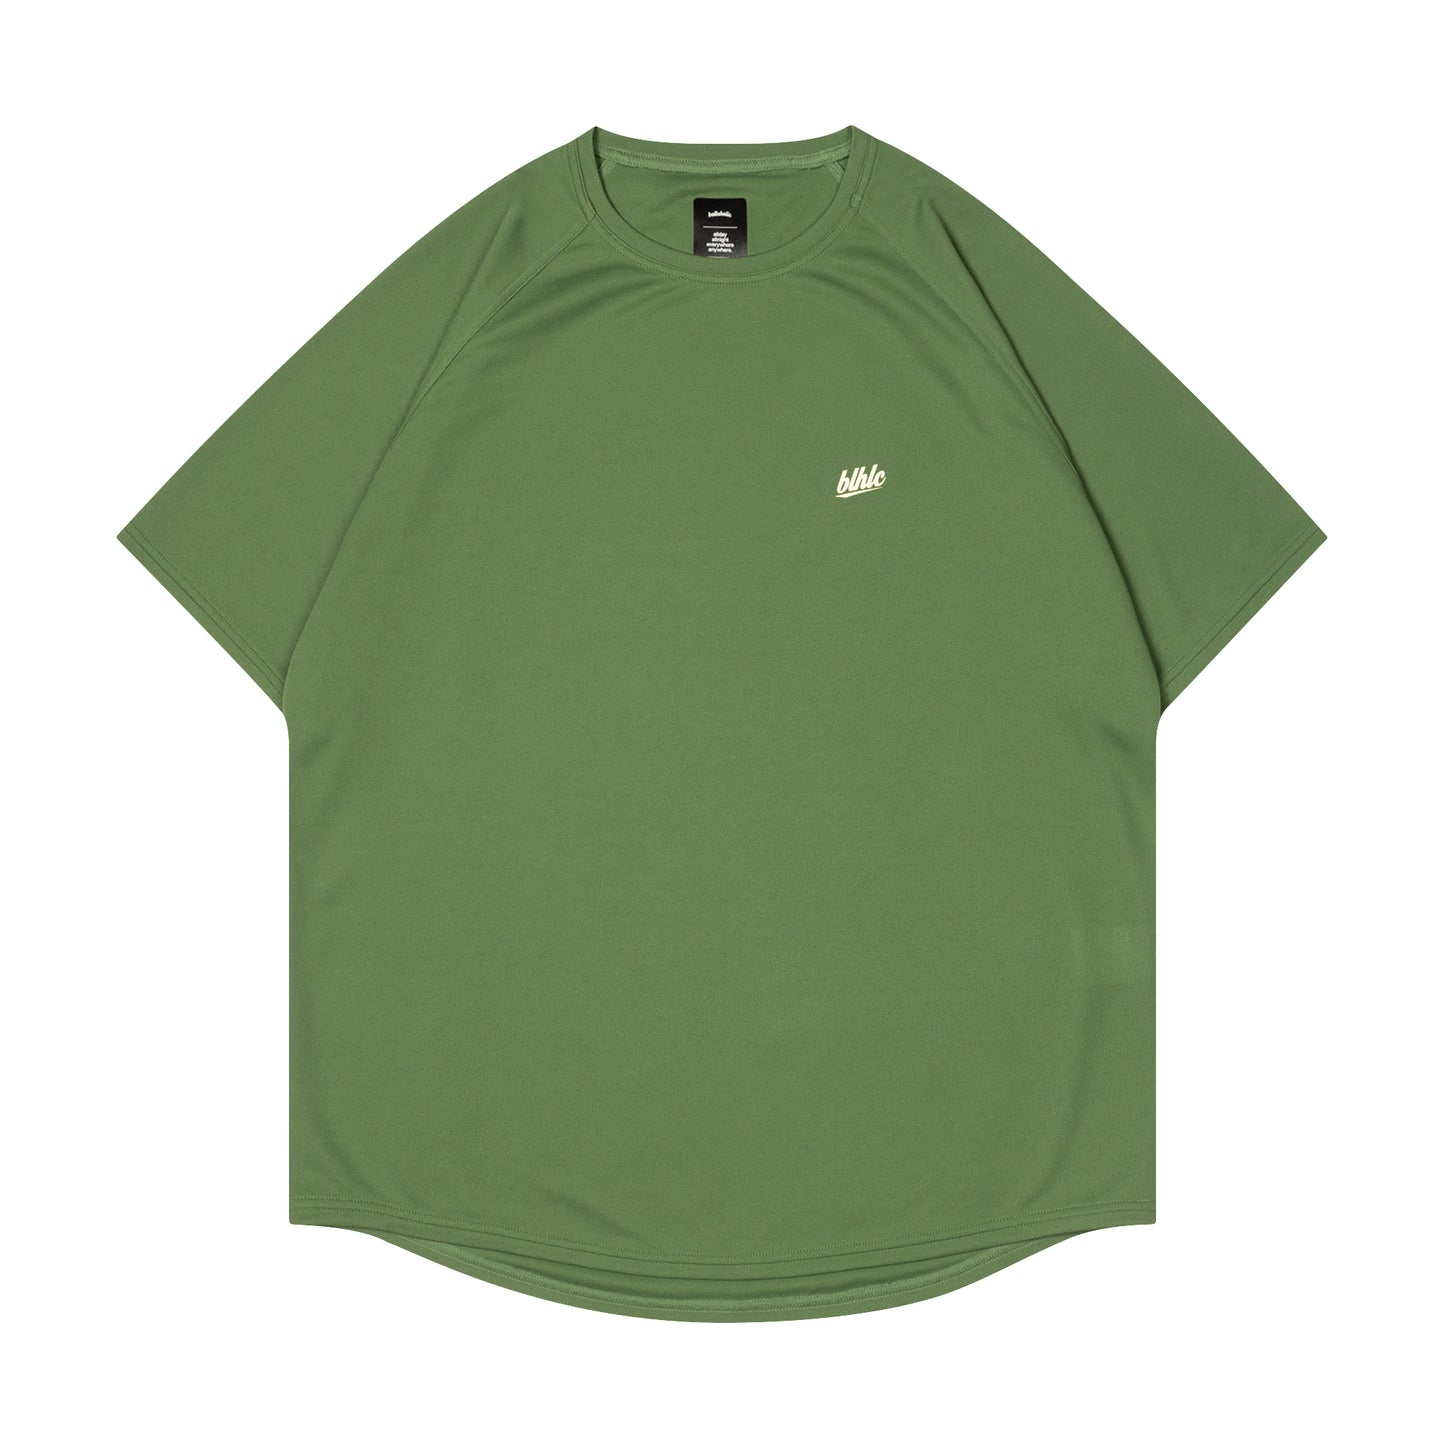 blhlc Cool Tee (olive/off white)